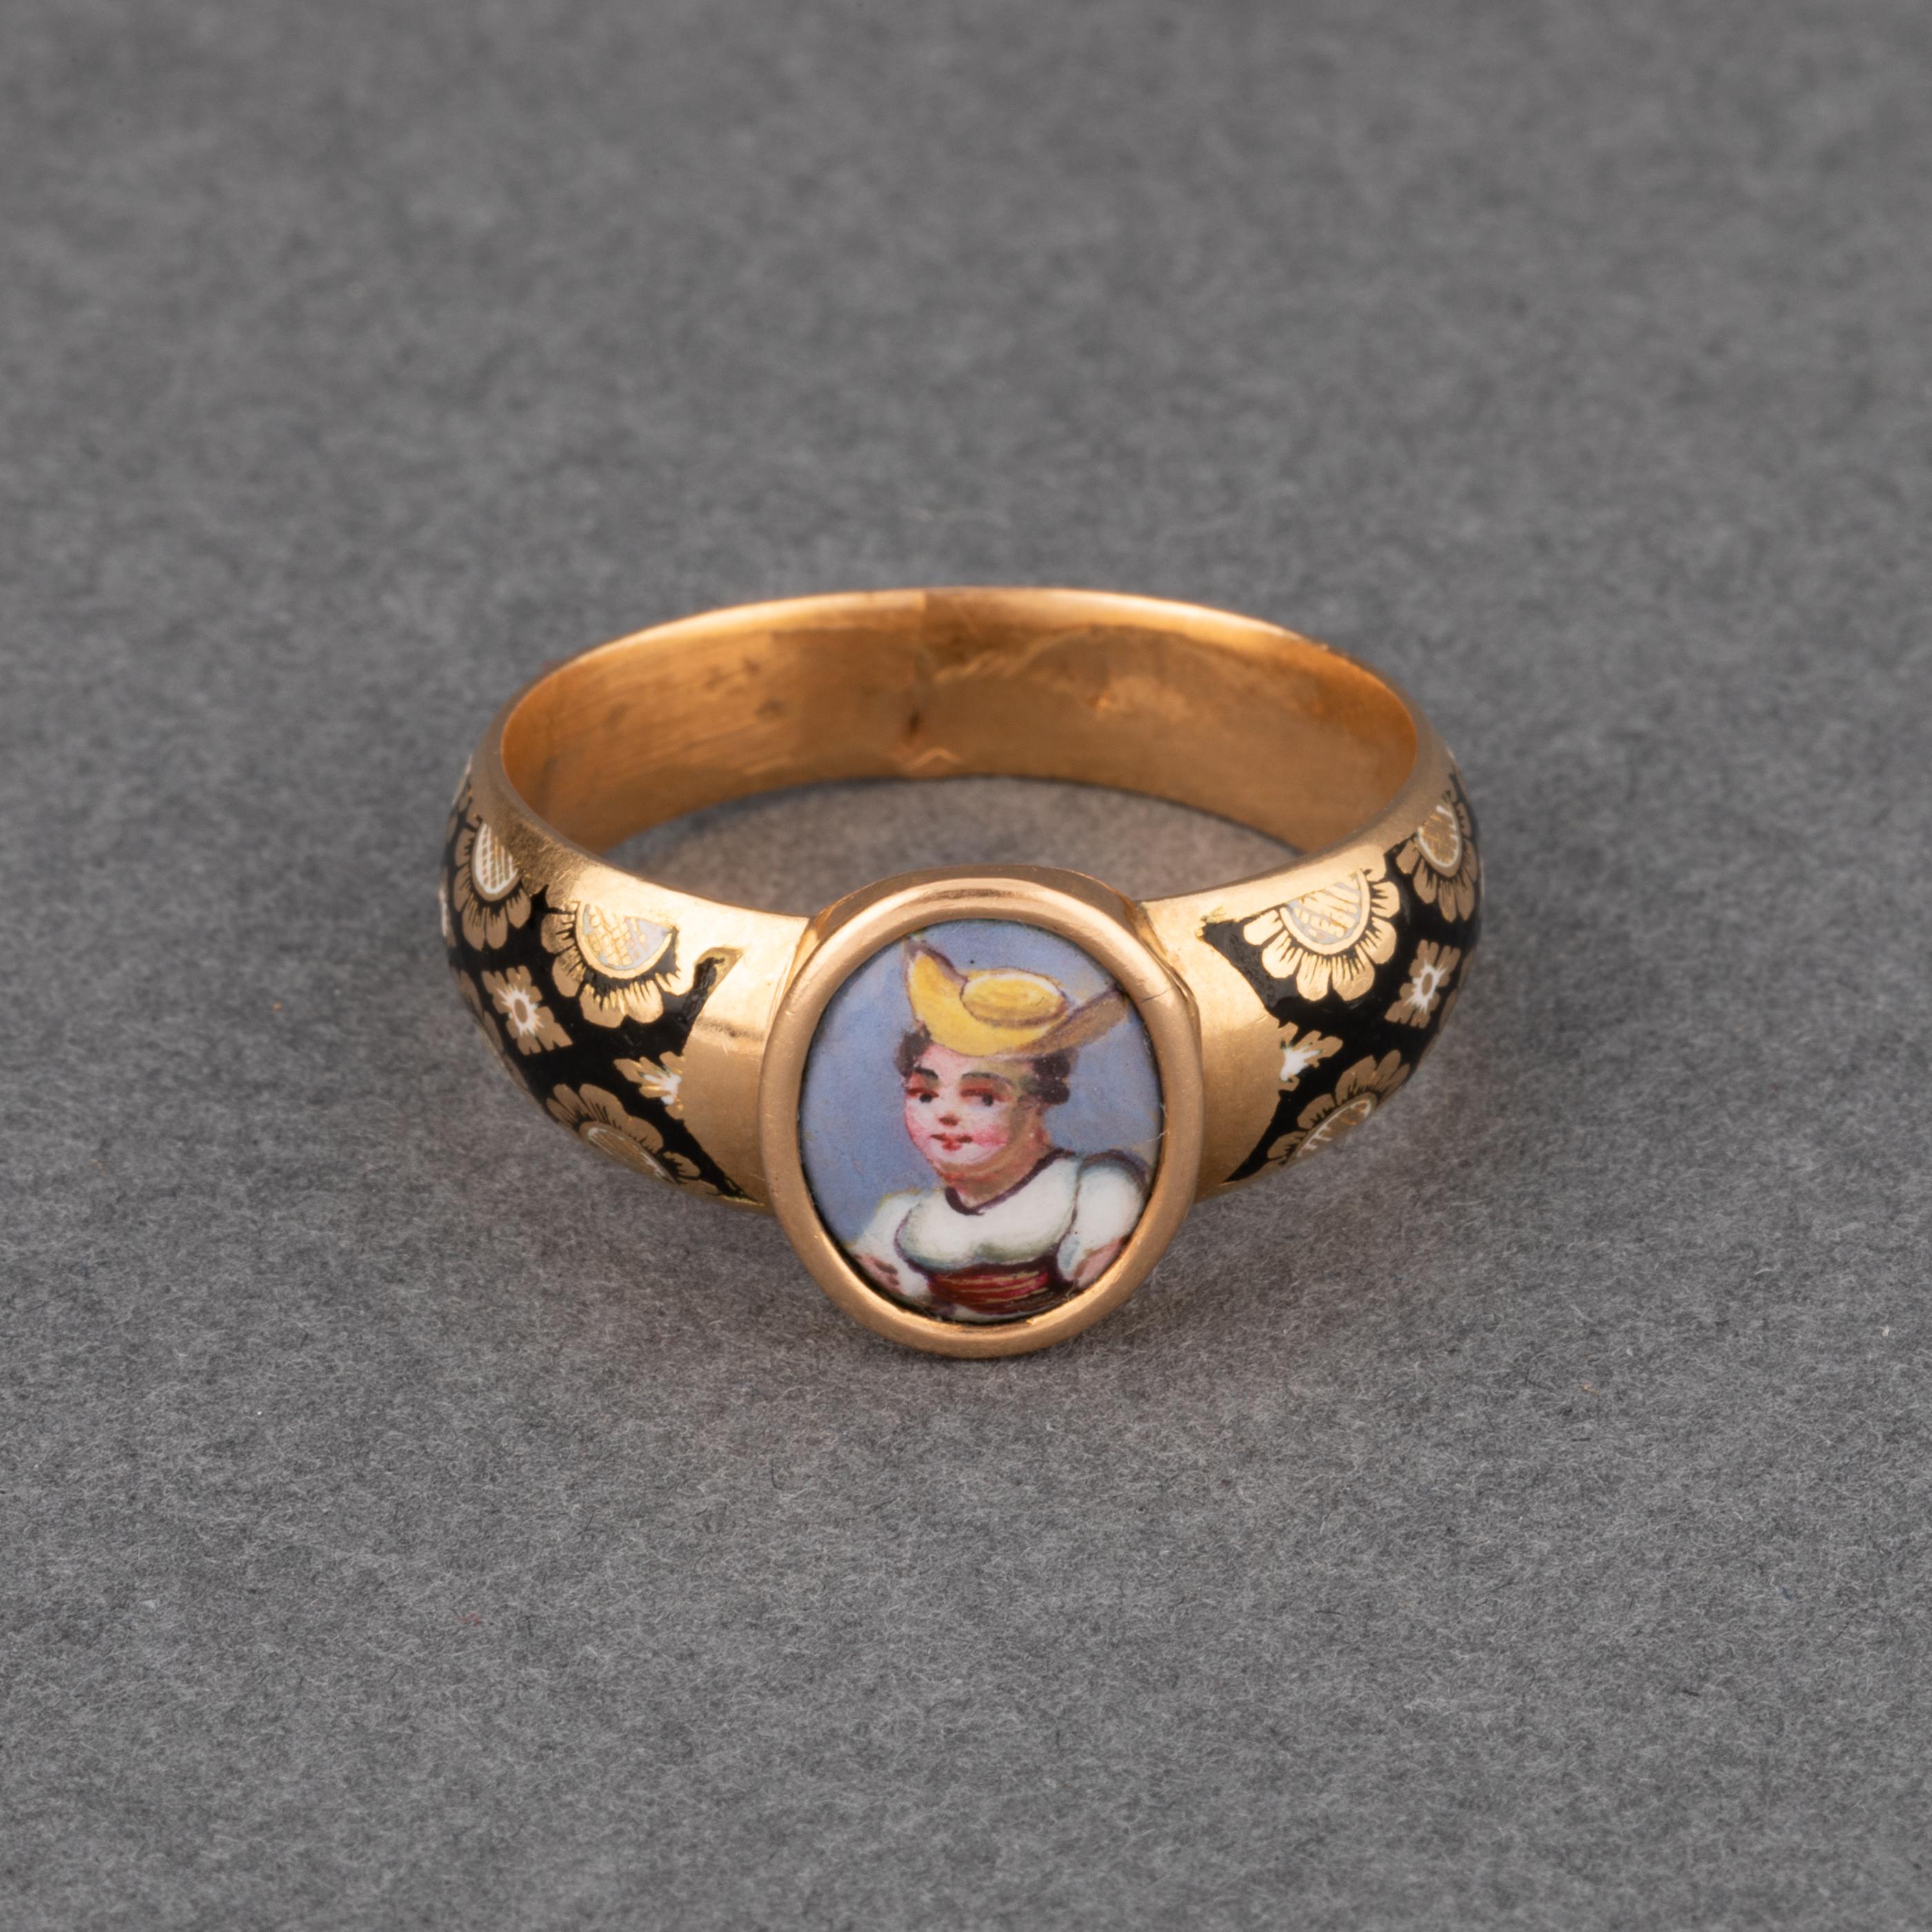 One rare and beautiful antique ring, made in early 19th century, European made.
Made in yellow gold 18k and painted enamel. The ring has a secret compartment that can be revealed by opening the front middle part.
The ring size is 60 or 9.2